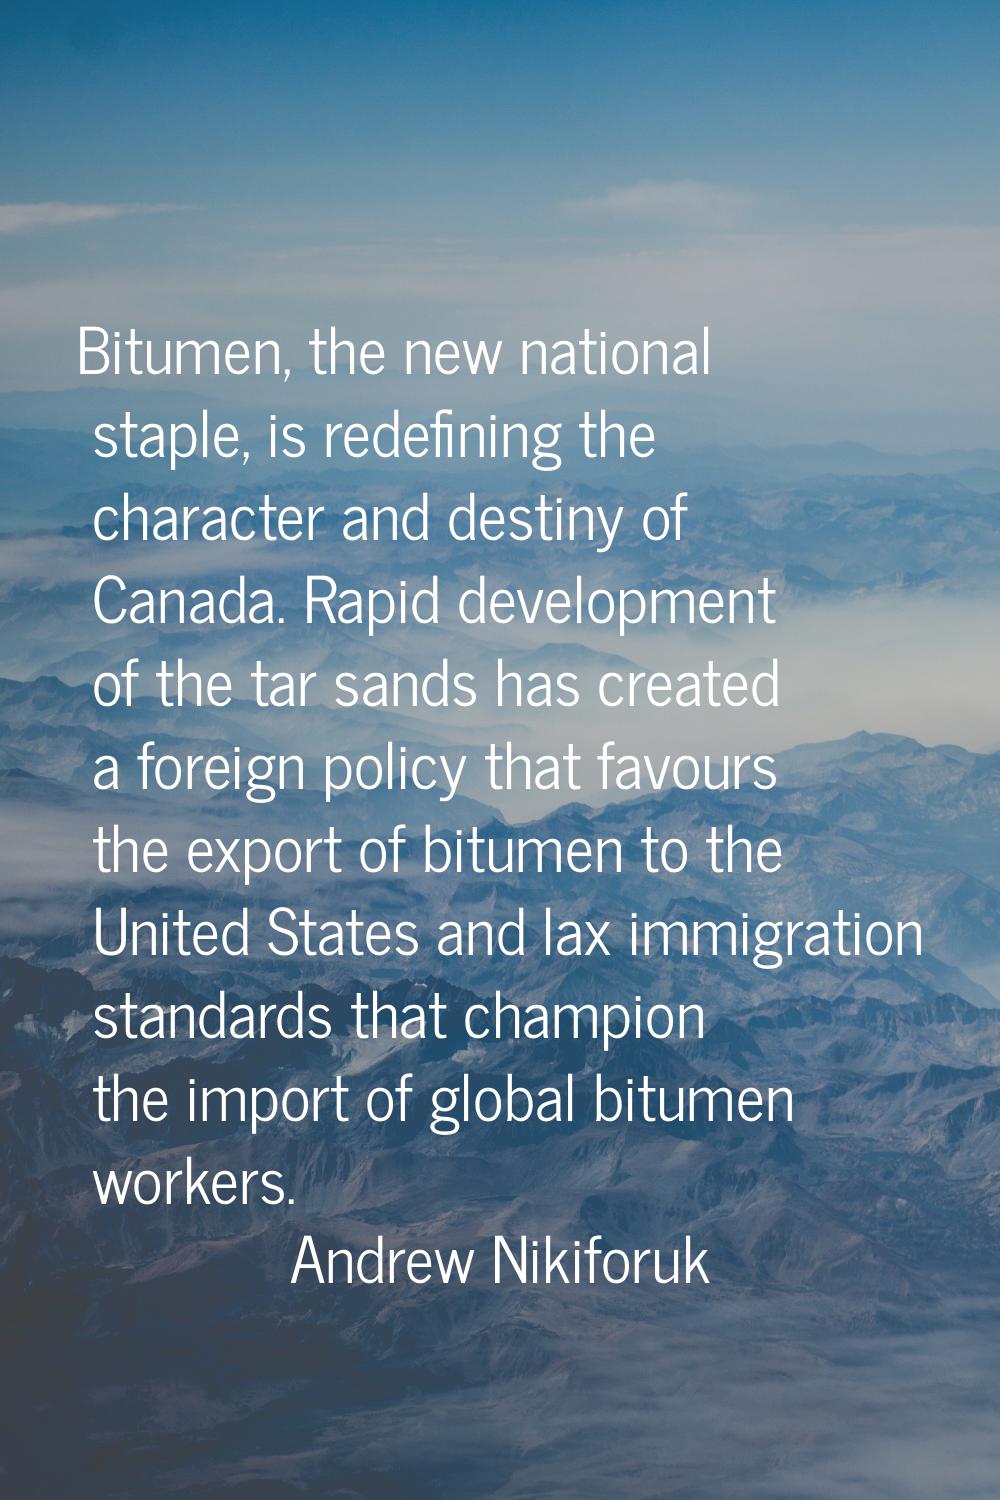 Bitumen, the new national staple, is redefining the character and destiny of Canada. Rapid developm